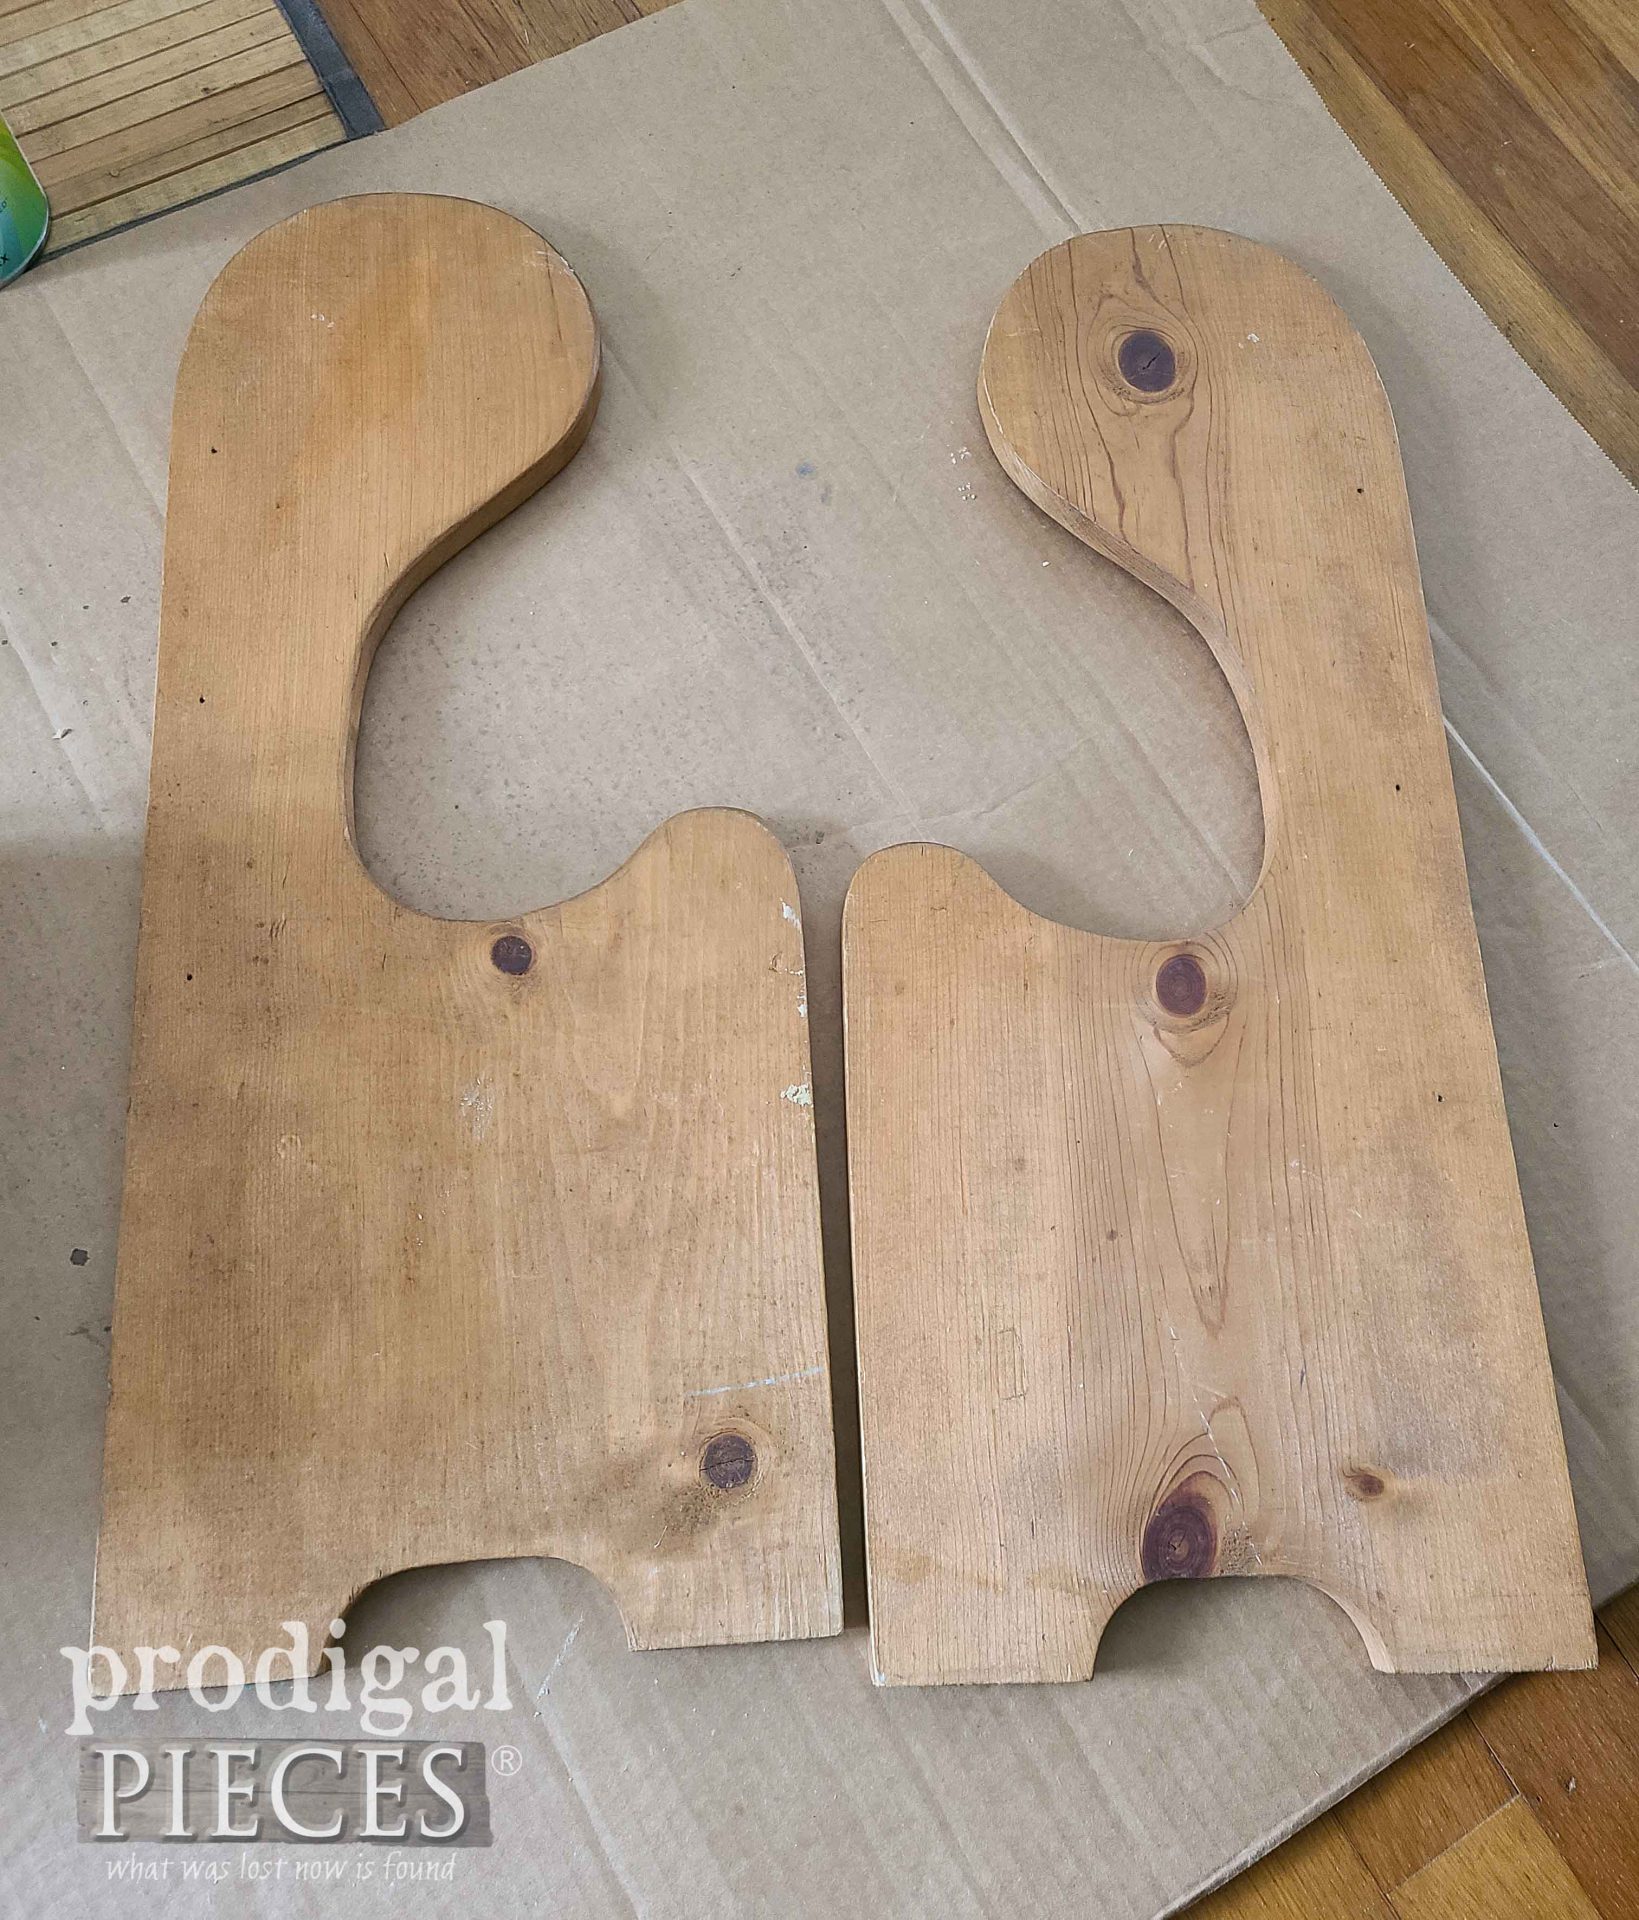 Upcycled Heart Cut-Out Furniture into Home Decor by Larissa of Prodigal Pieces | prodigalpieces.com #prodigalpieces #diy #homedecor